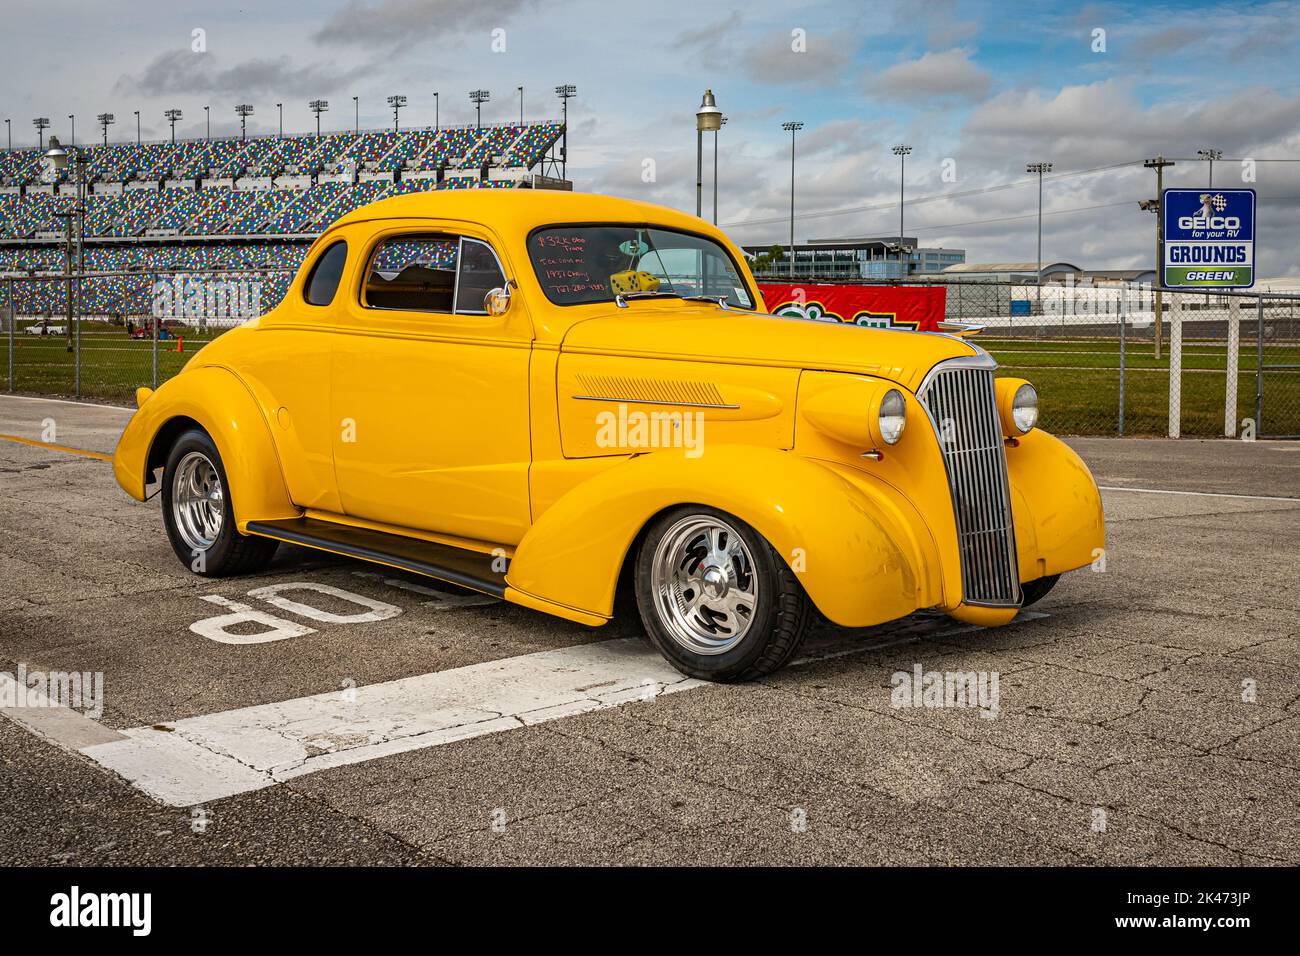 Daytona Beach, FL - November 29, 2020: Low perspective front corner view of a 1937 Chevrolet Master Deluxe Business Coupe at a local car show. Stock Photo